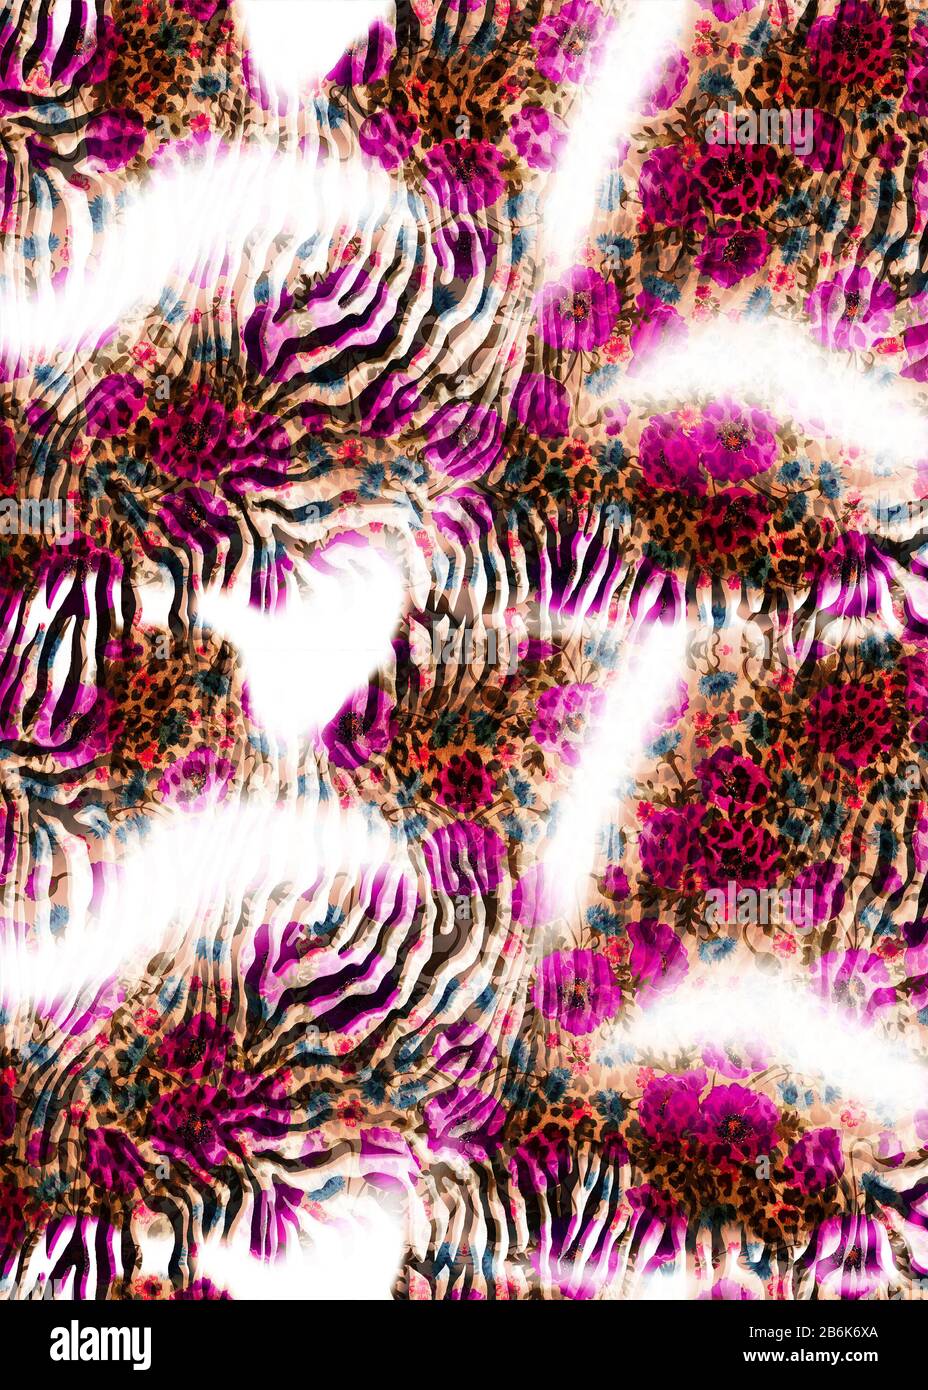 Animal skin texture with pink flowers. Zebra and Leopard  fashionable pattern. - illustration. Stock Photo